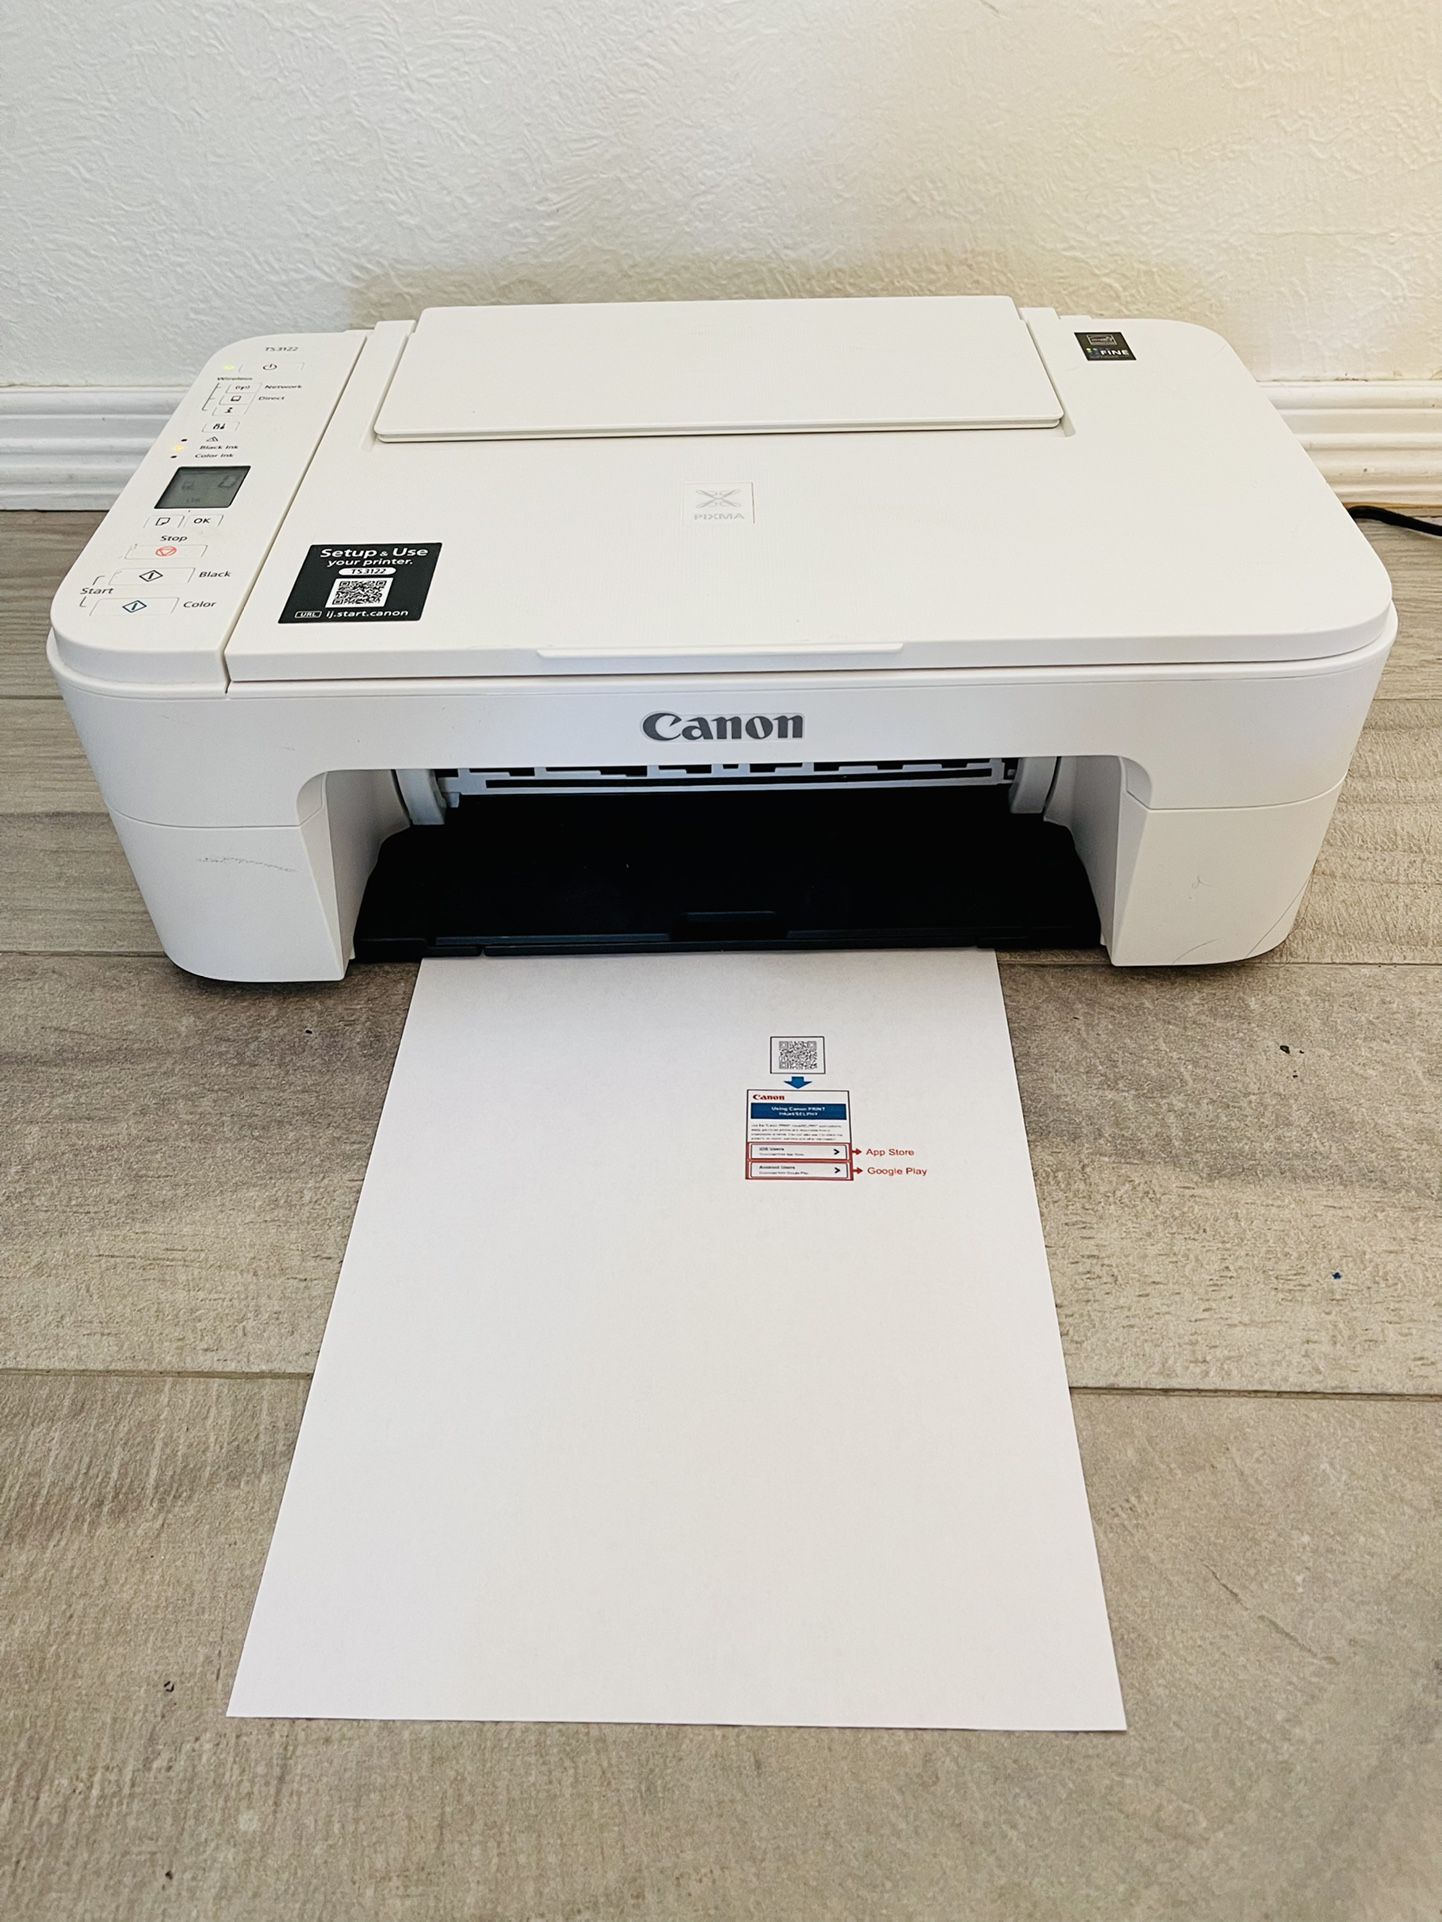 Canon Printer working +ink